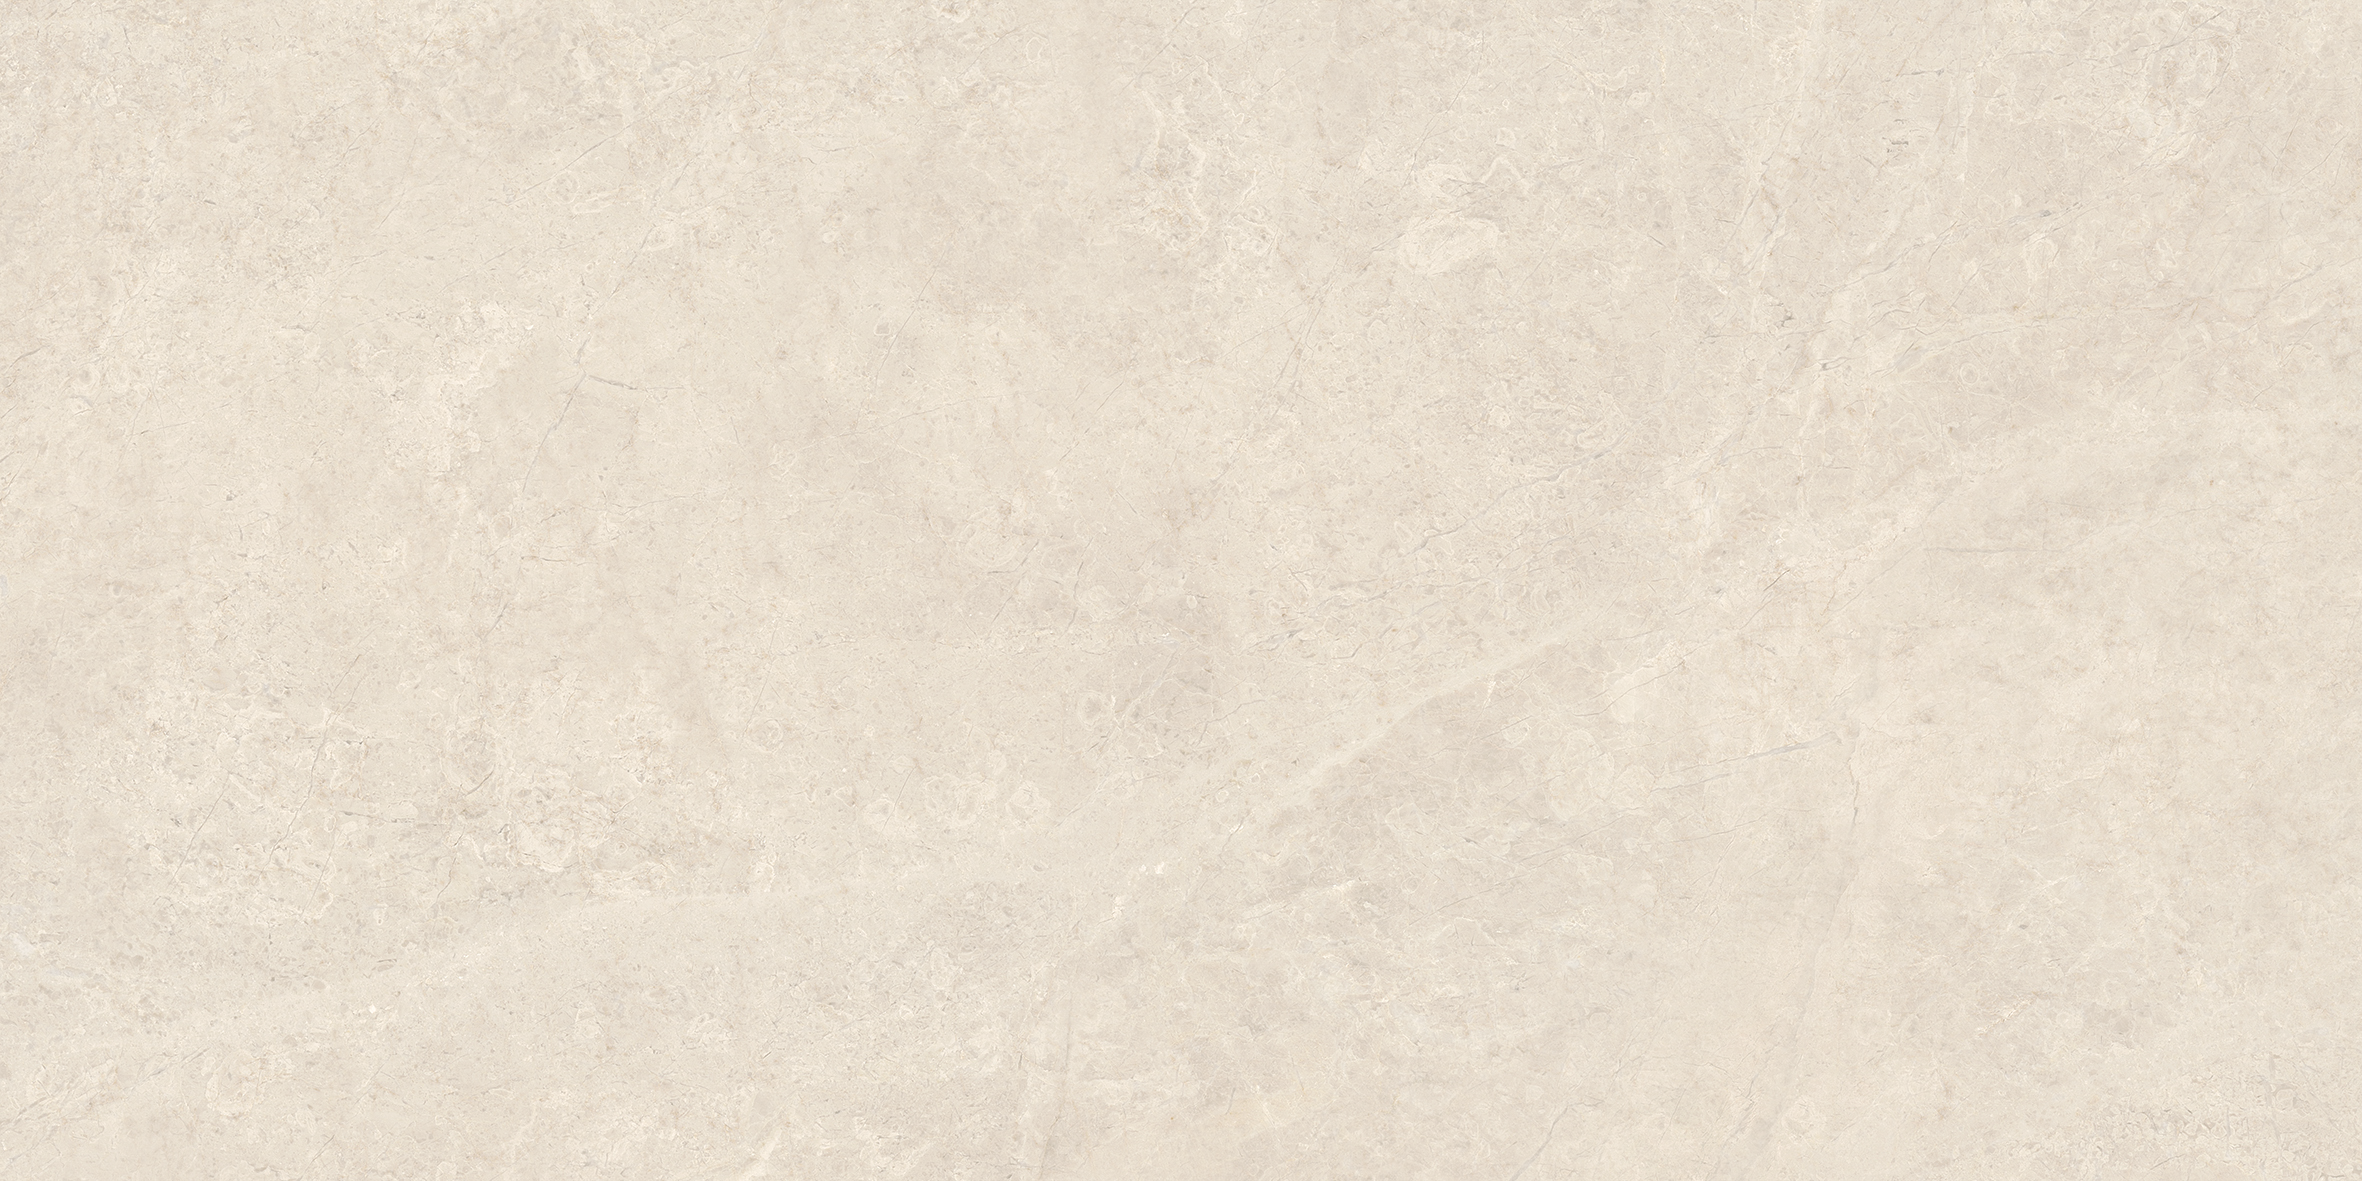 allure ivory pattern glazed porcelain field tile from mayfair anatolia collection distributed by surface group international polished finish rectified edge 12x24 rectangle shape